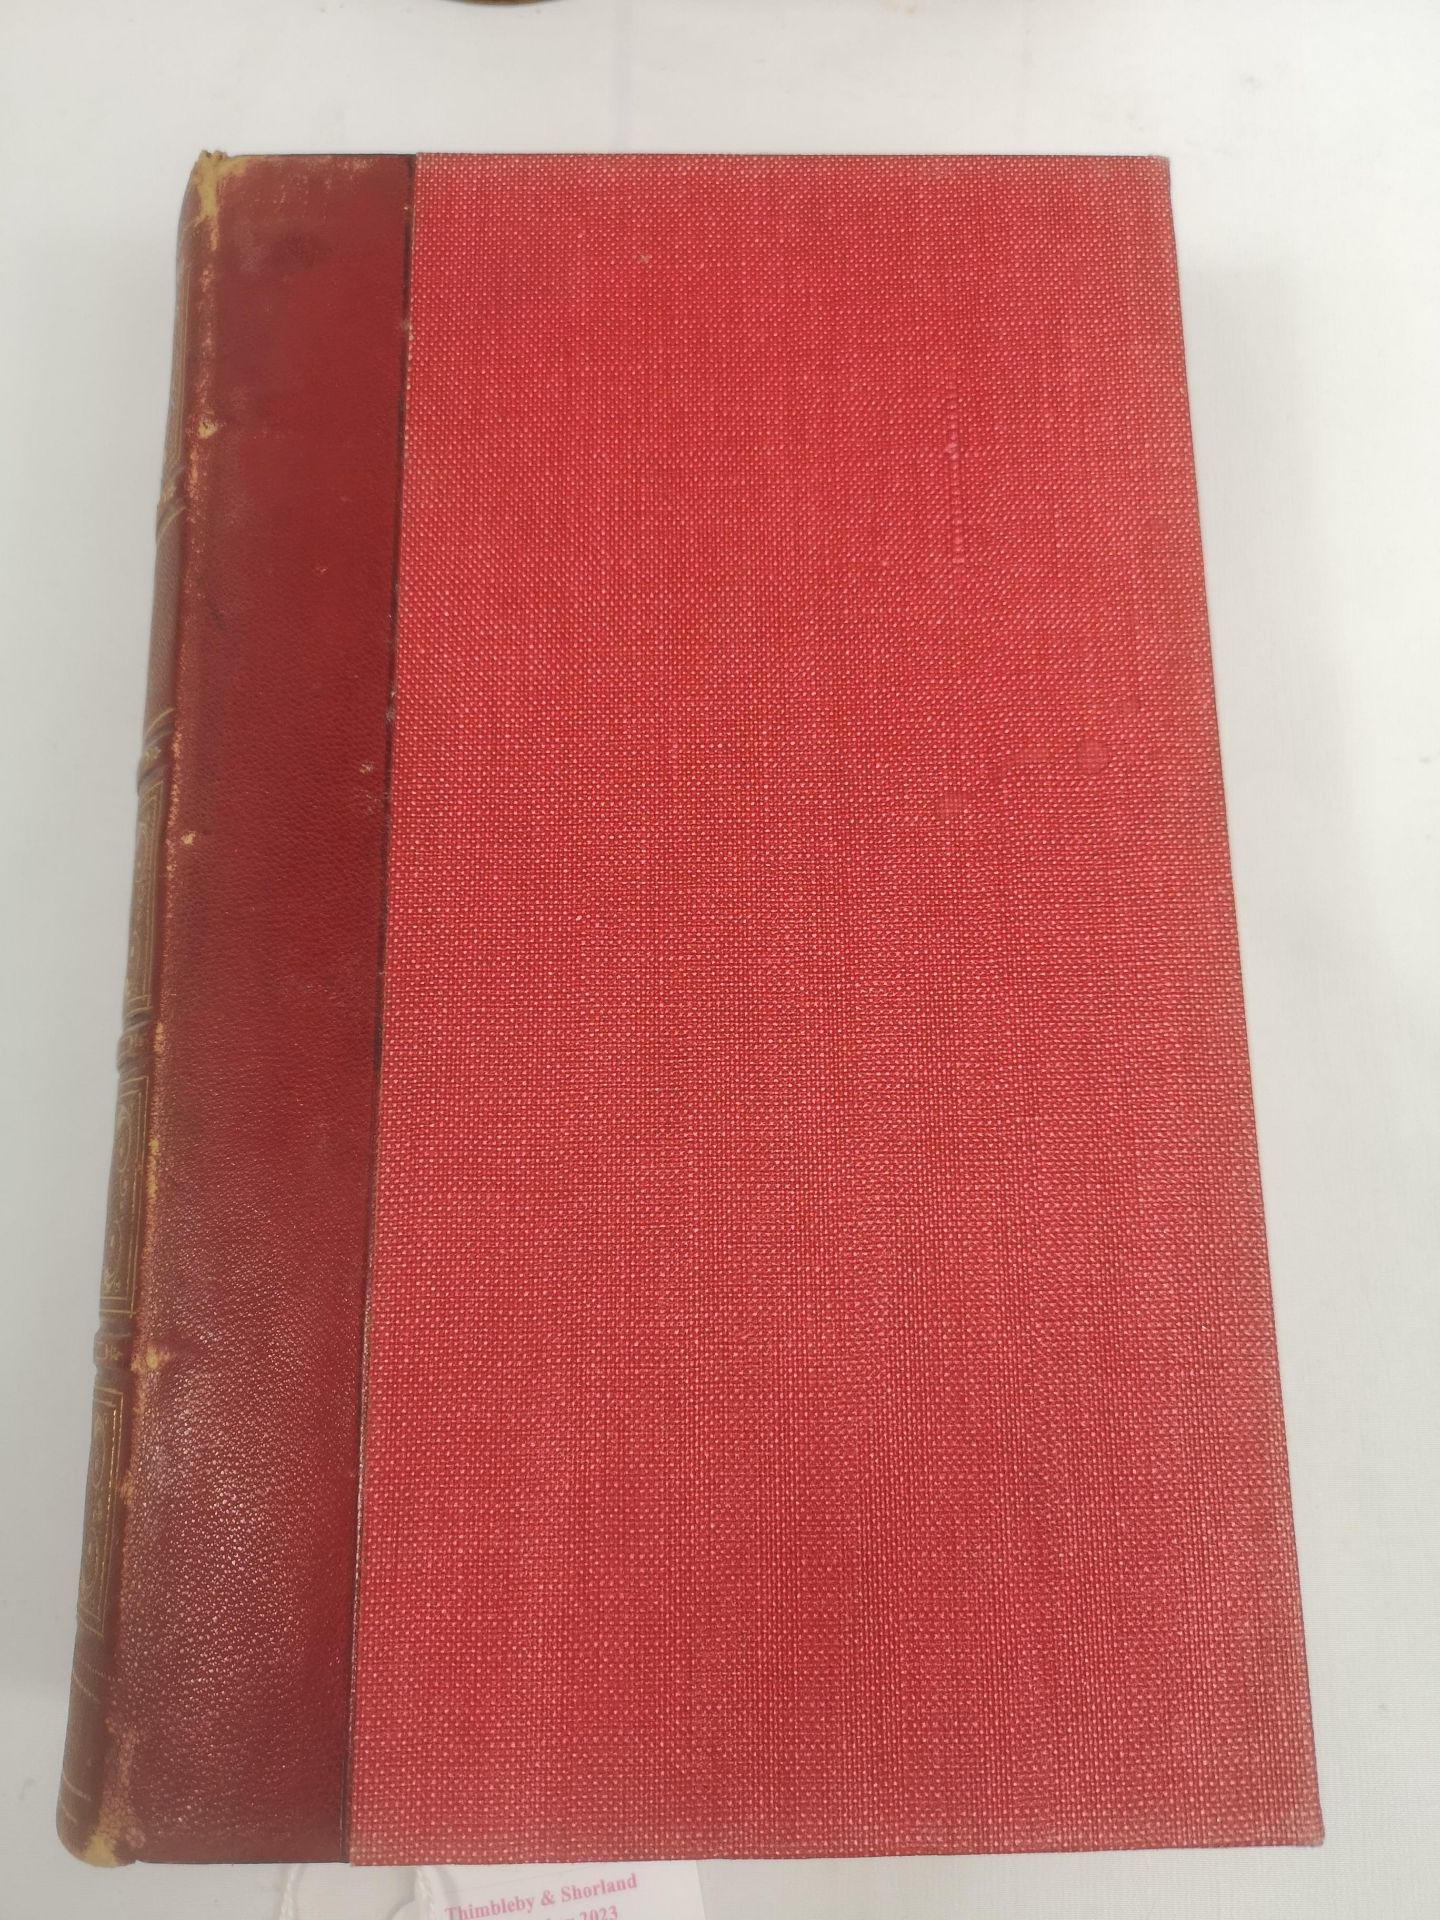 Collection of leather bound books - Image 2 of 11